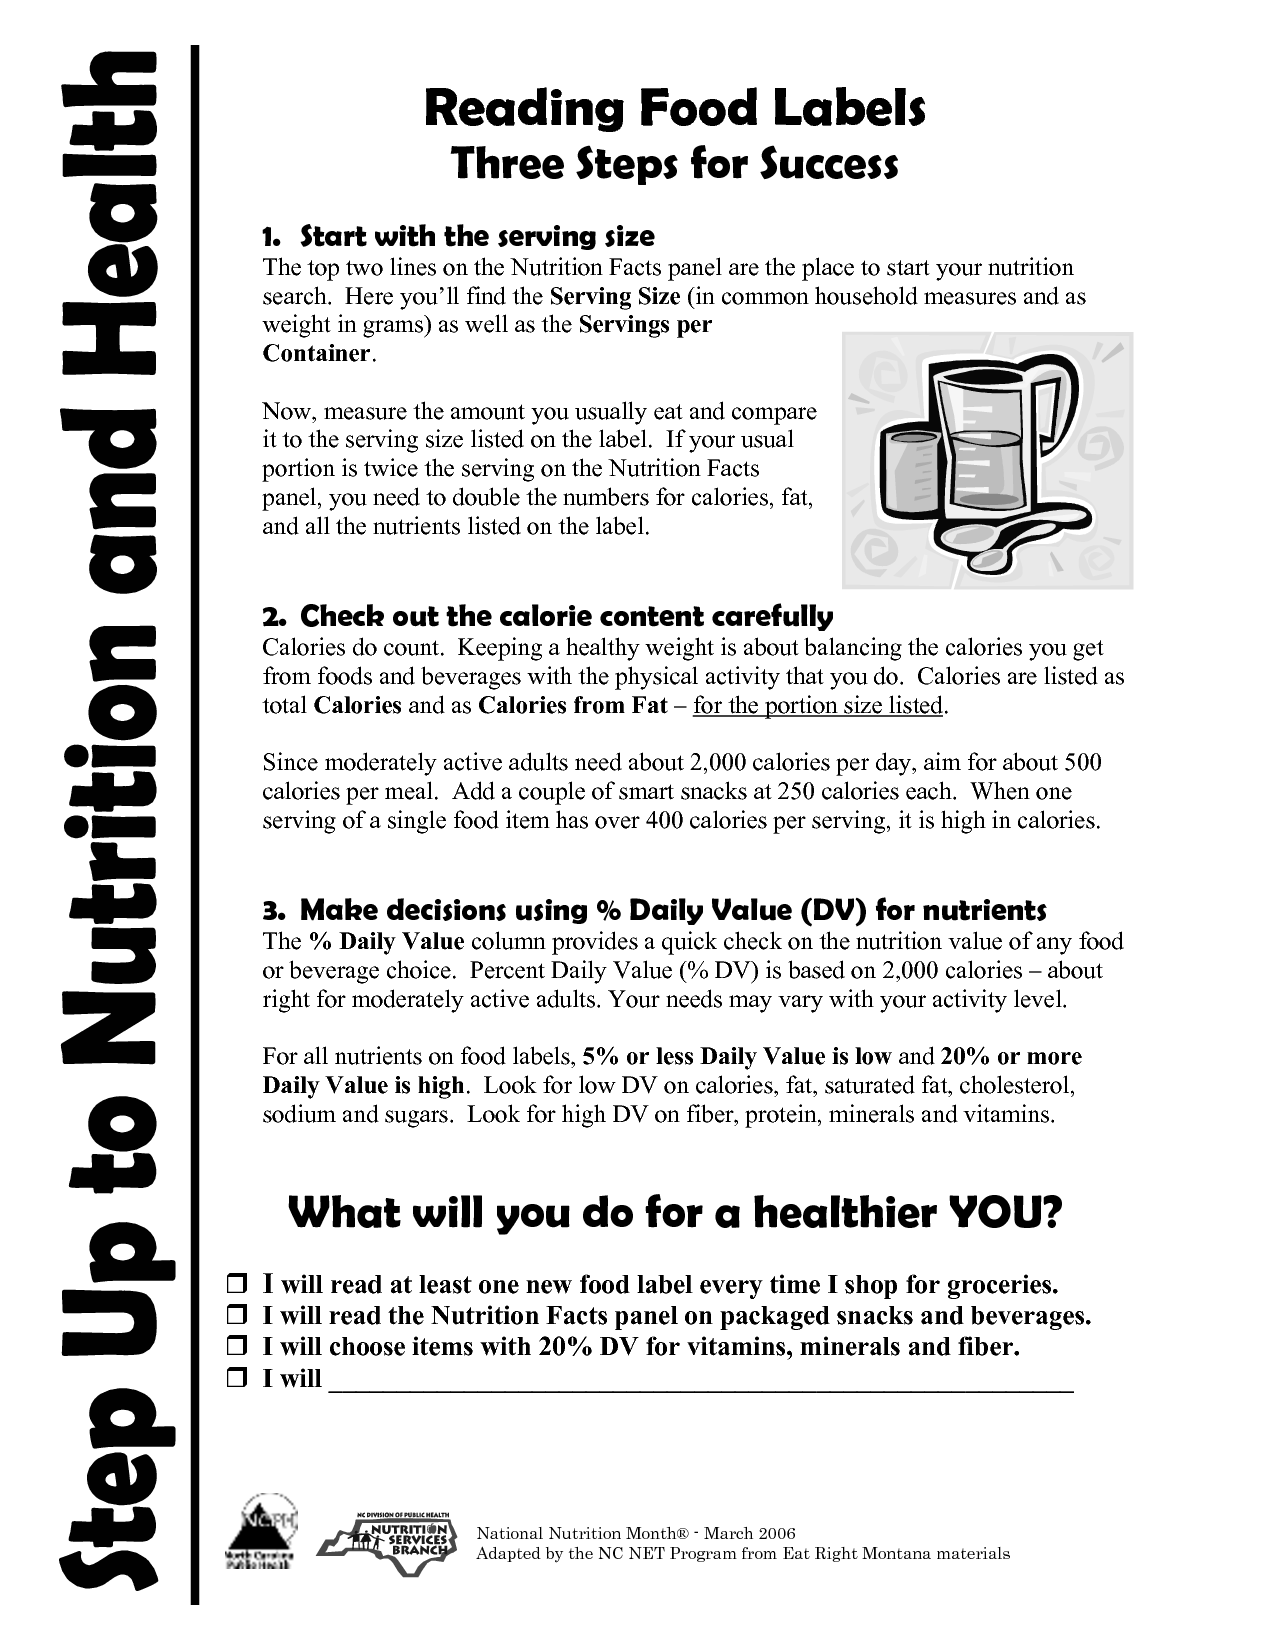 nutrition-label-worksheet-pdf-answers-free-download-goodimg-co